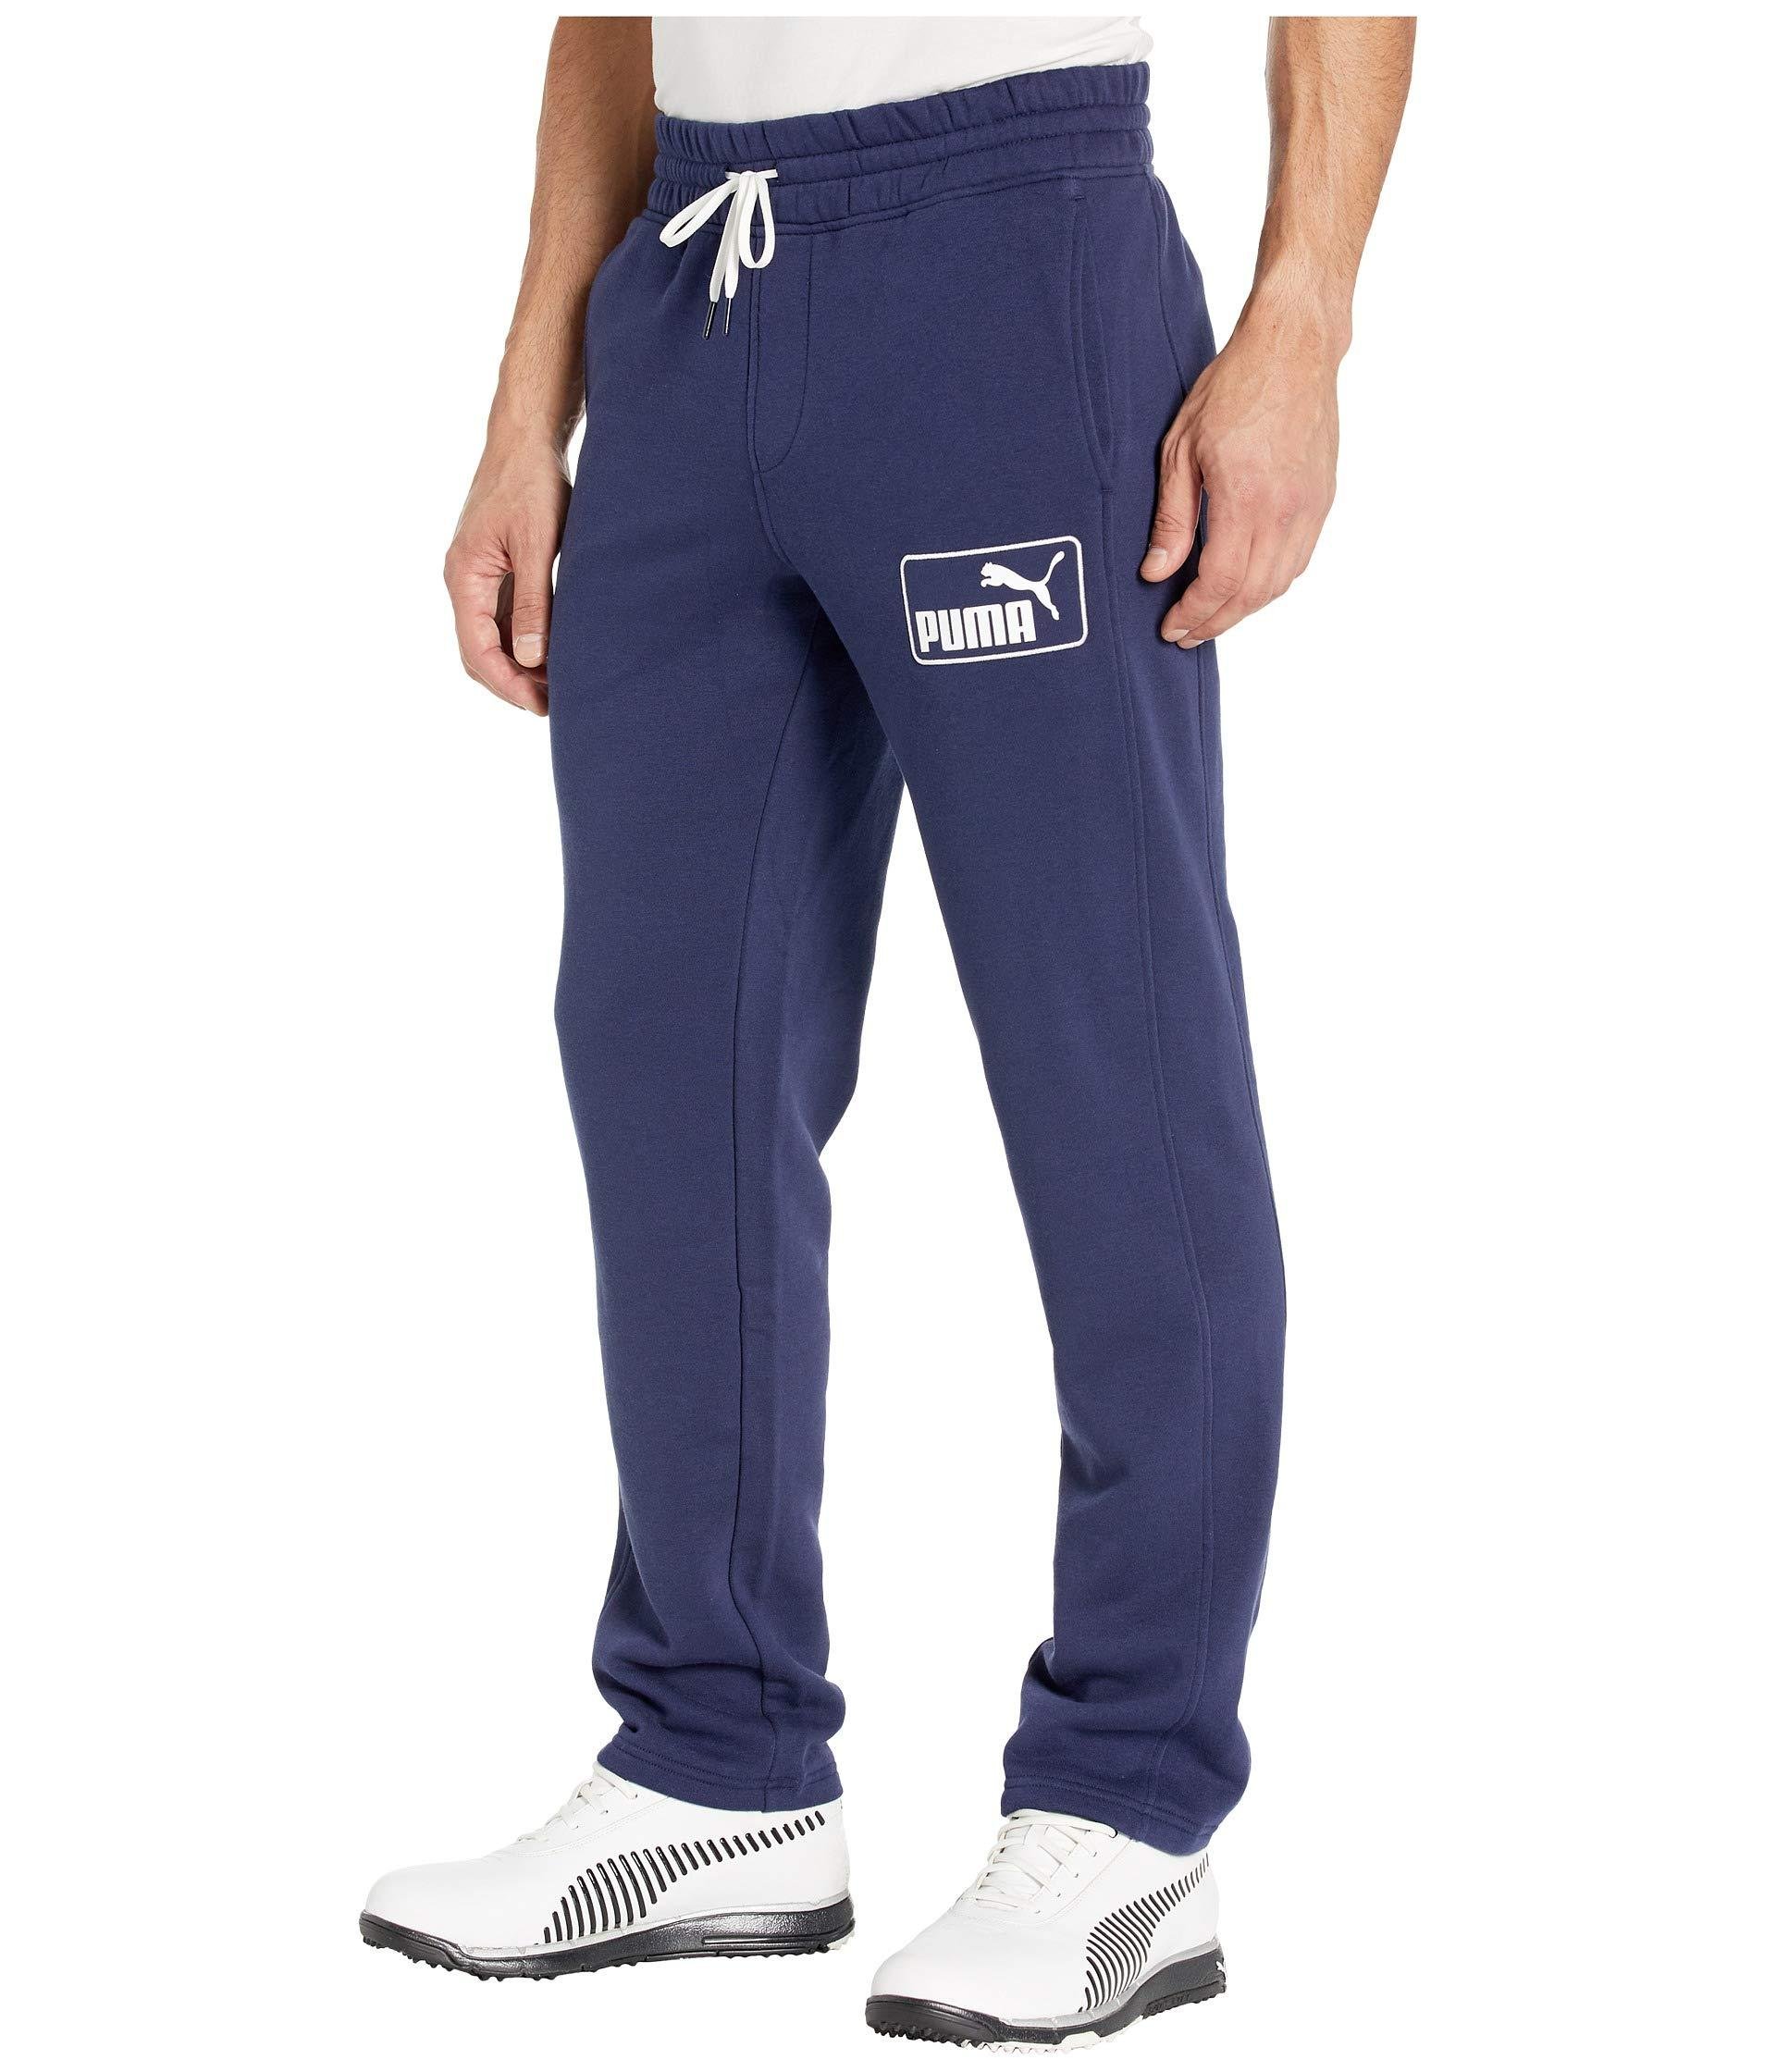 PUMA Cotton Logo Track Pants in Blue for Men - Lyst